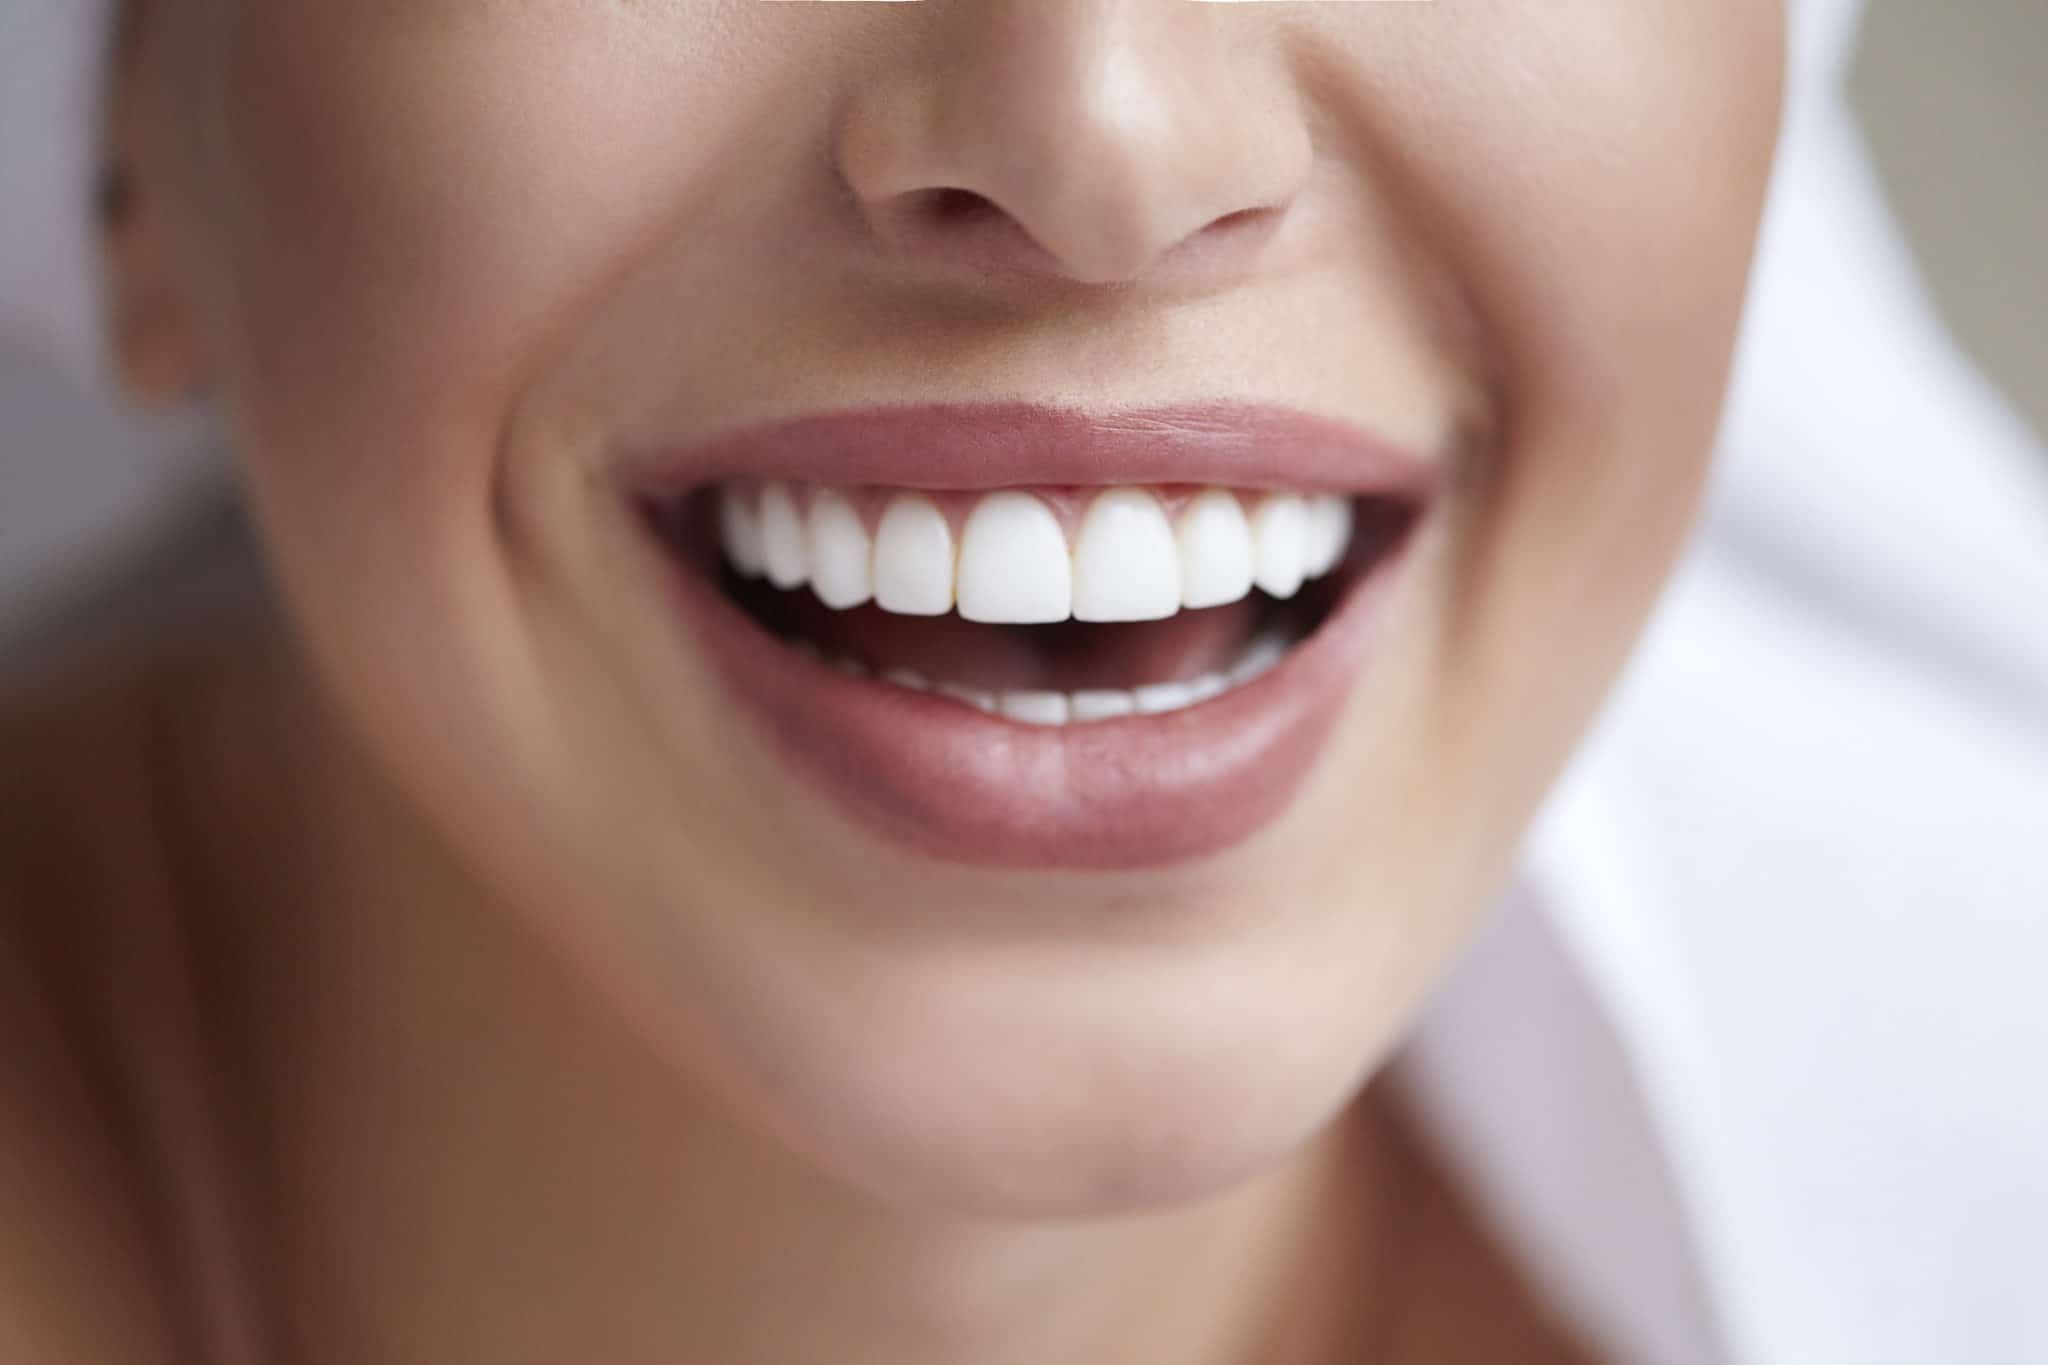 A woman is smiling and showing off her beautiful cosmetic dental work